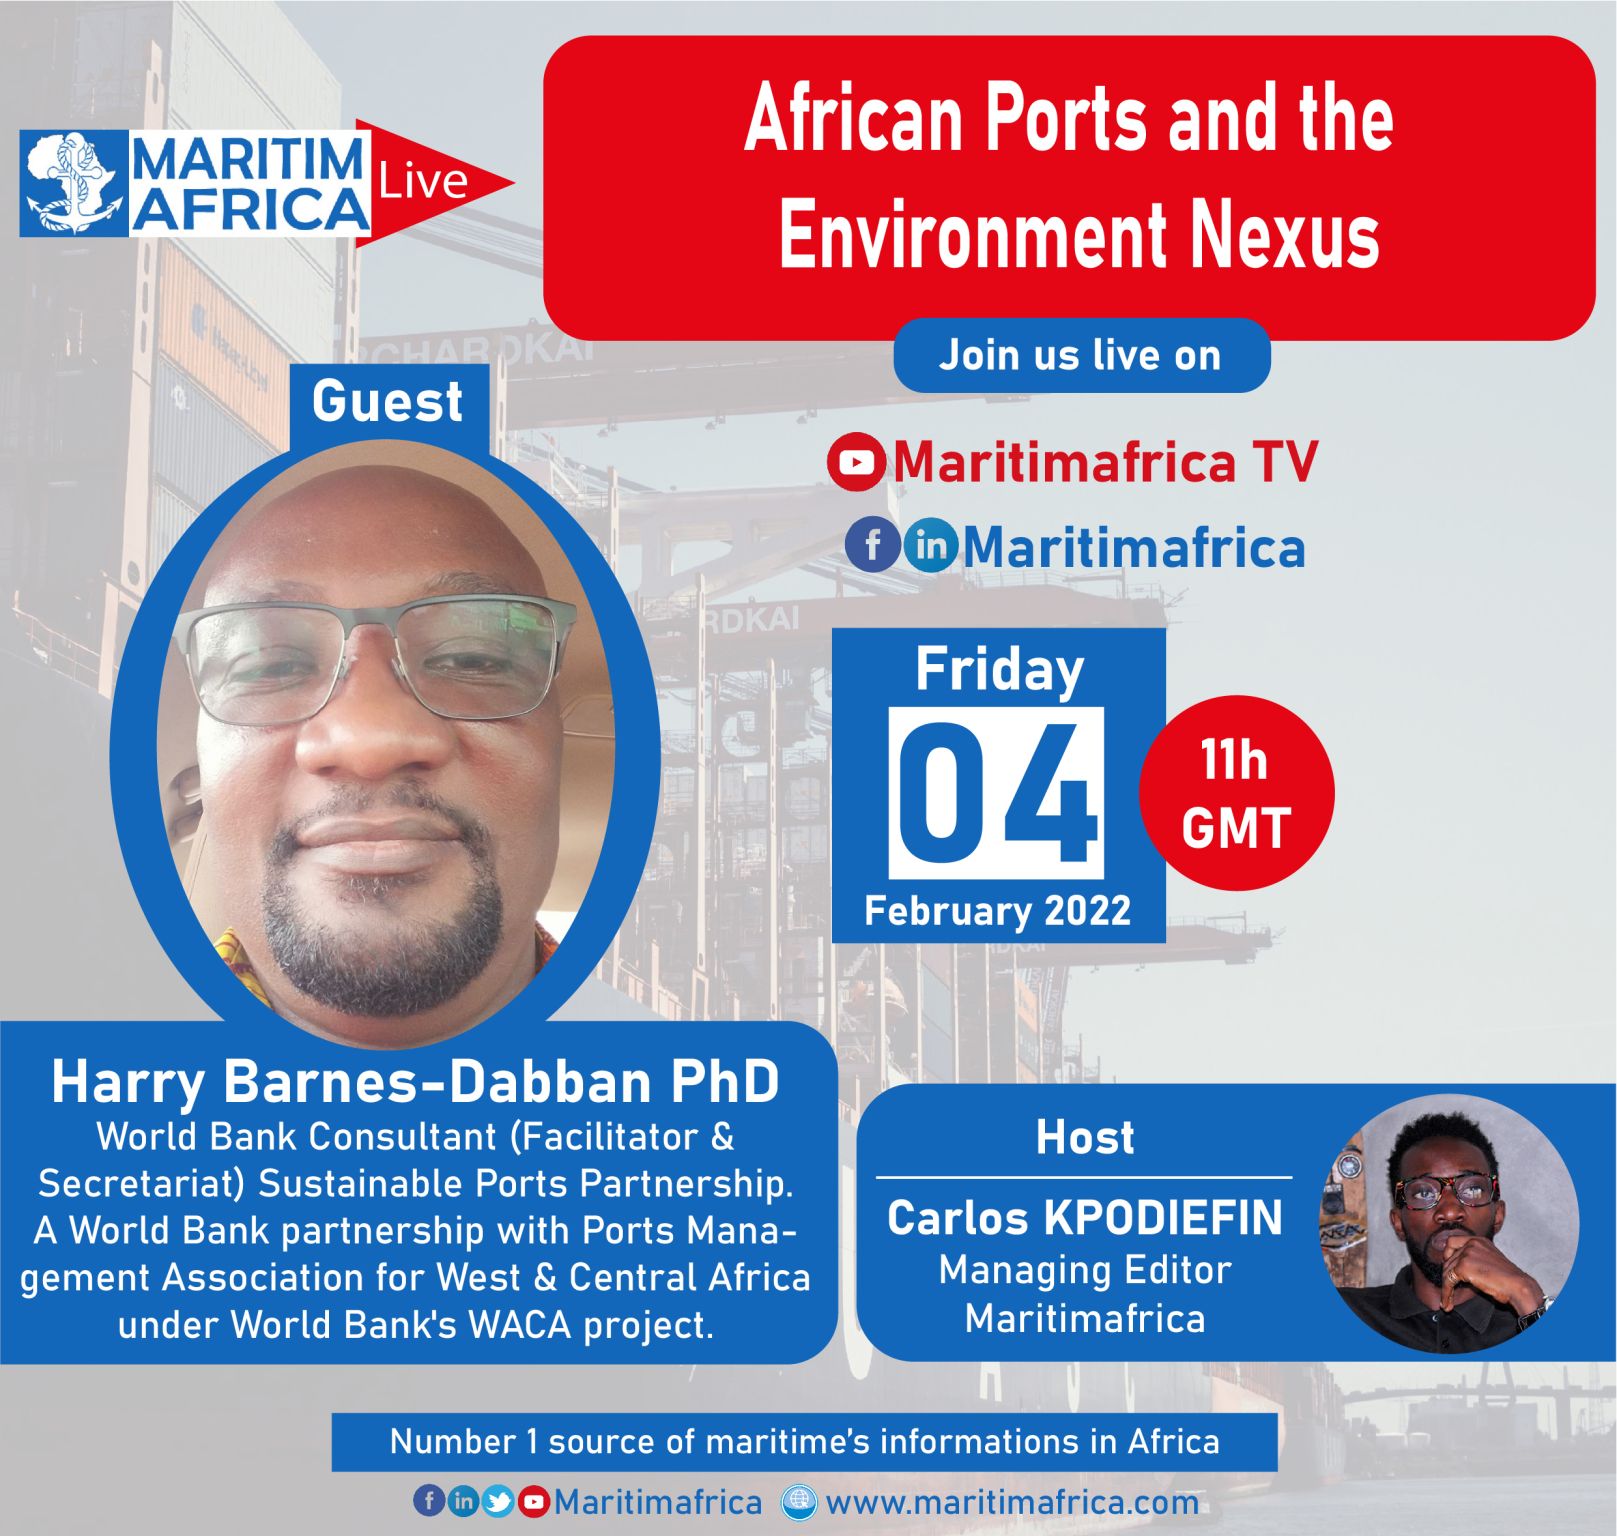 Maritimafrica Live : “African Ports and the Environment Nexus”